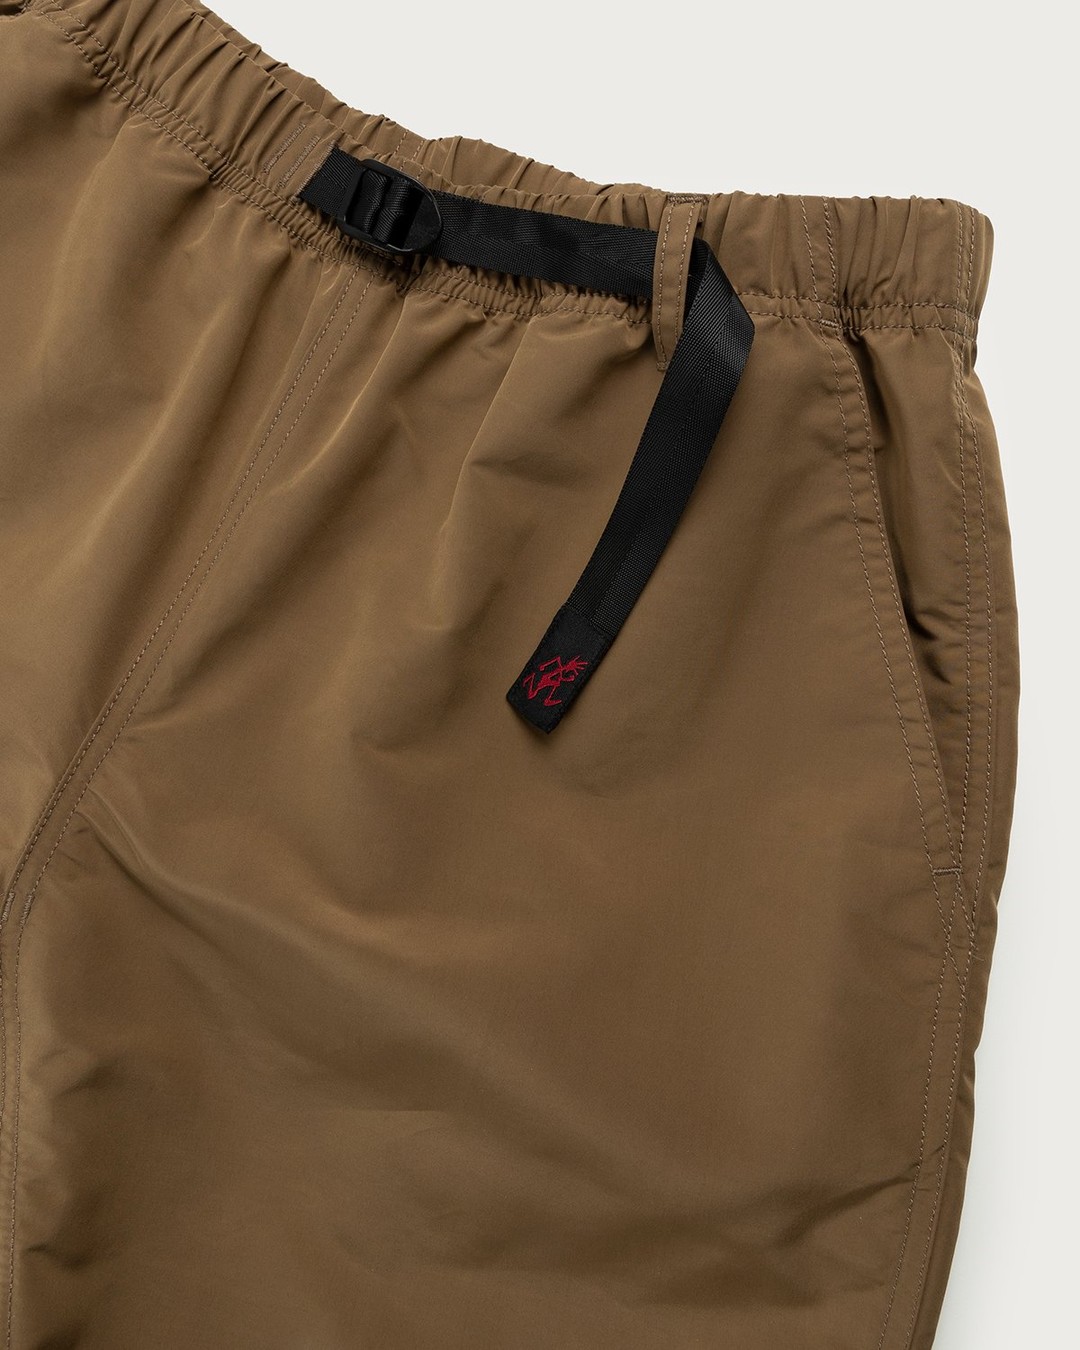 Gramicci x Highsnobiety – HS Sports Shell Packable Shorts Tan - Active Shorts - Brown - Image 4